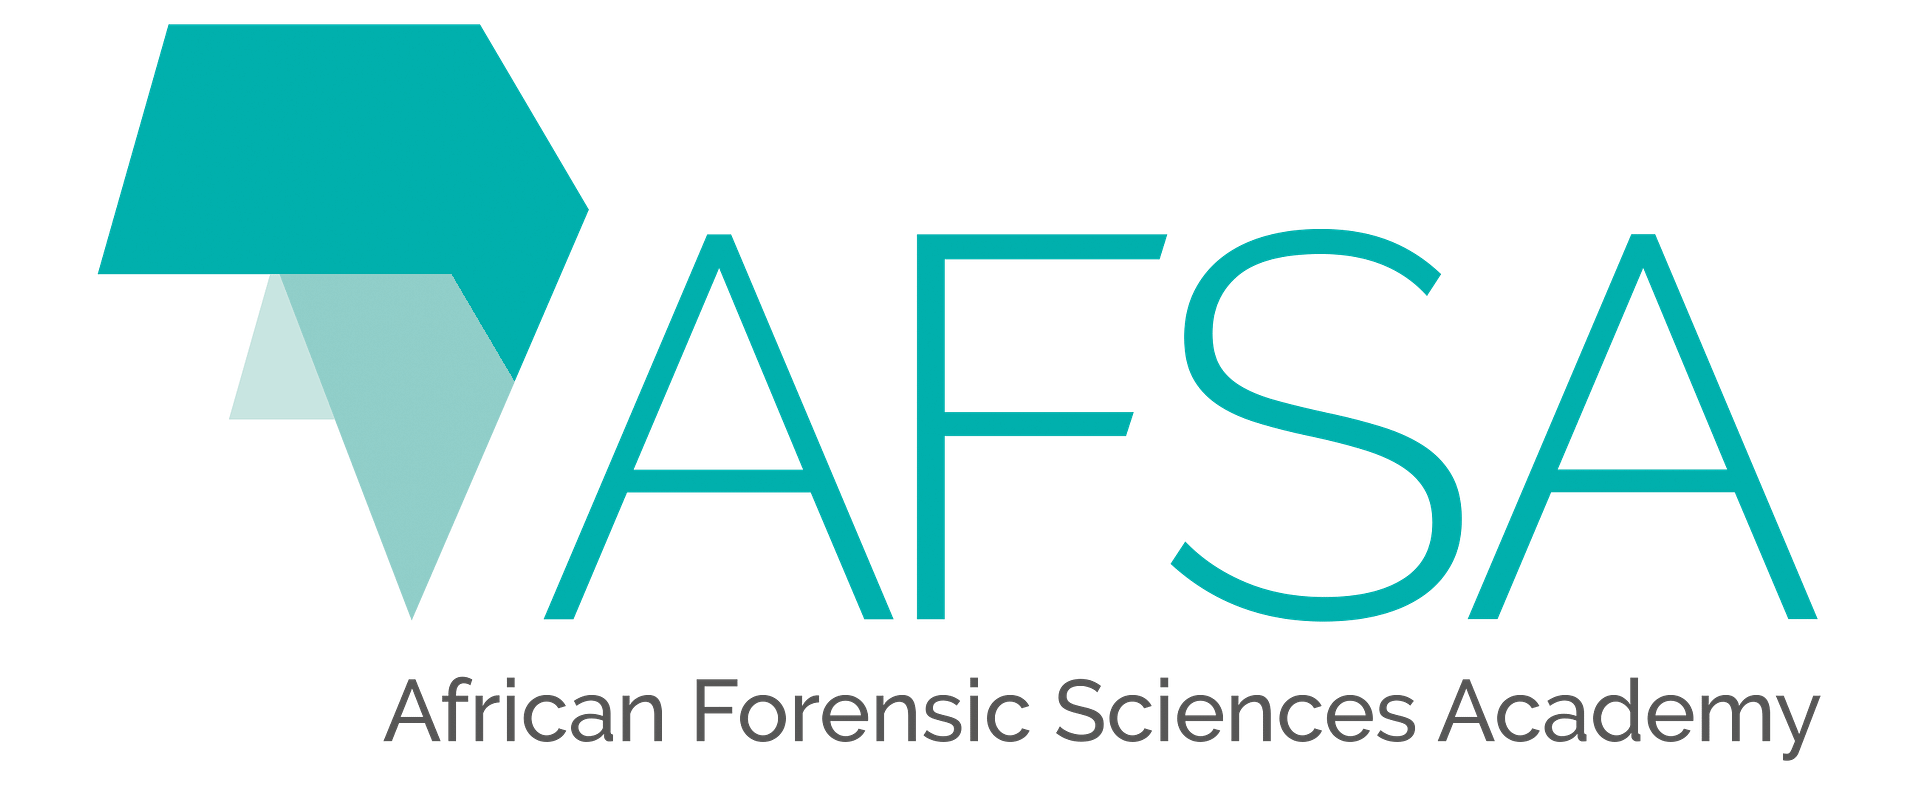 African Forensic Sciences Academy